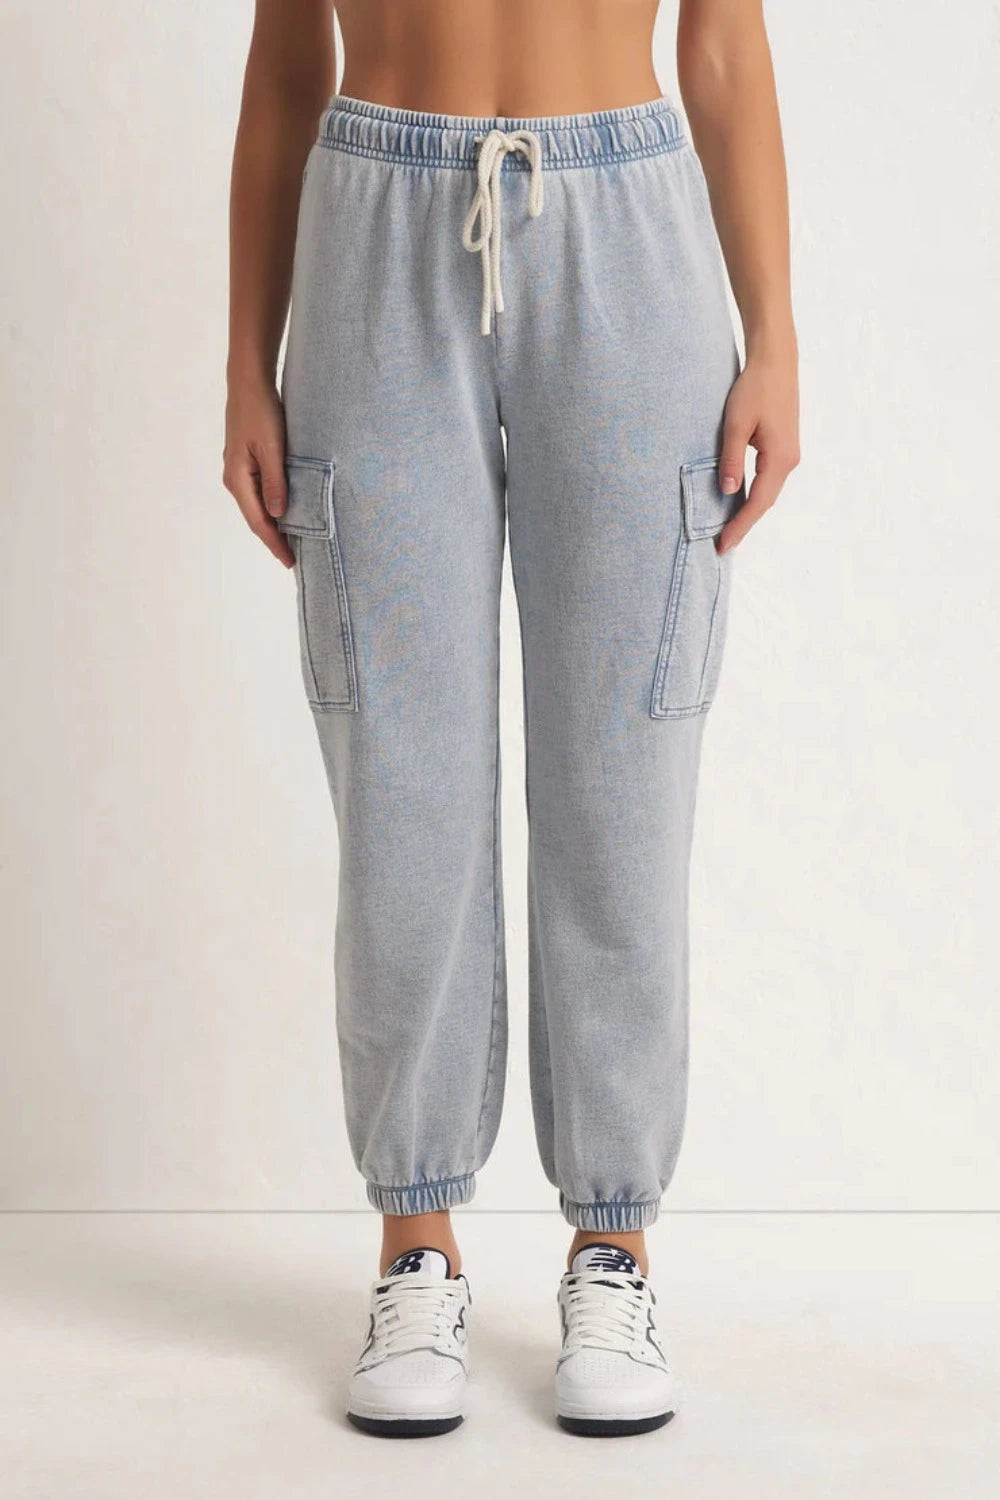 Tempo Knit Denim Jogger in Washed Indigo – Research and Design